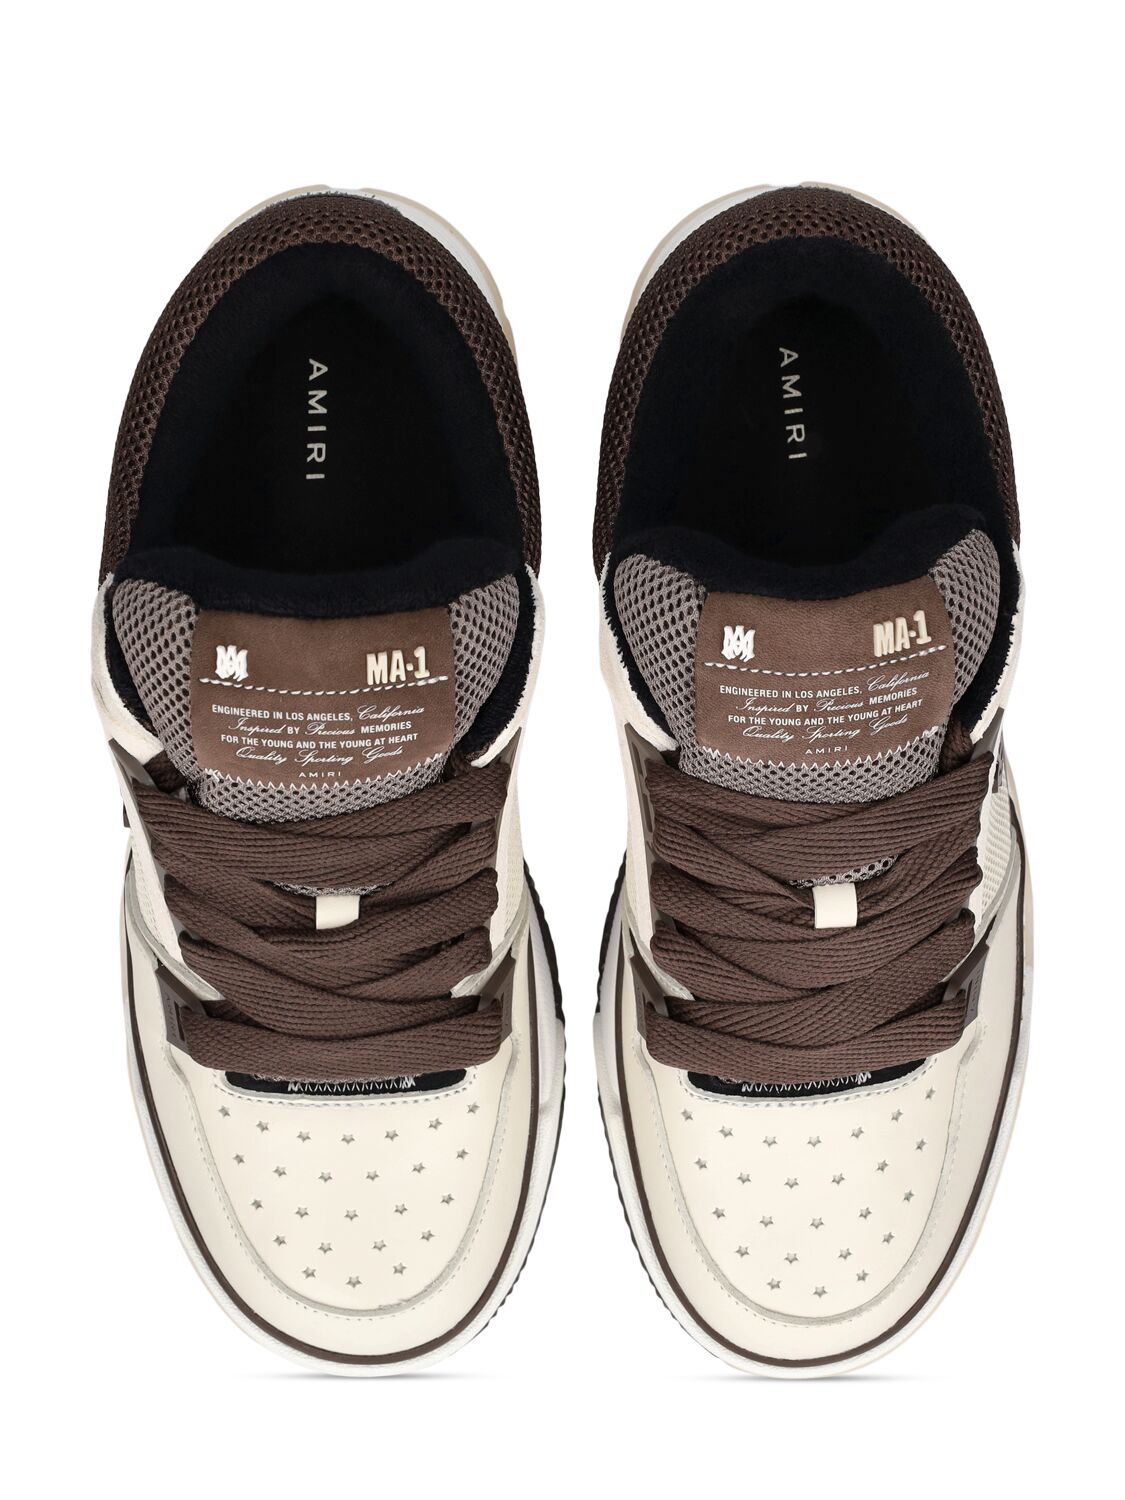 Shop Amiri Ma-1 Leather Low Top Sneakers In 棕色